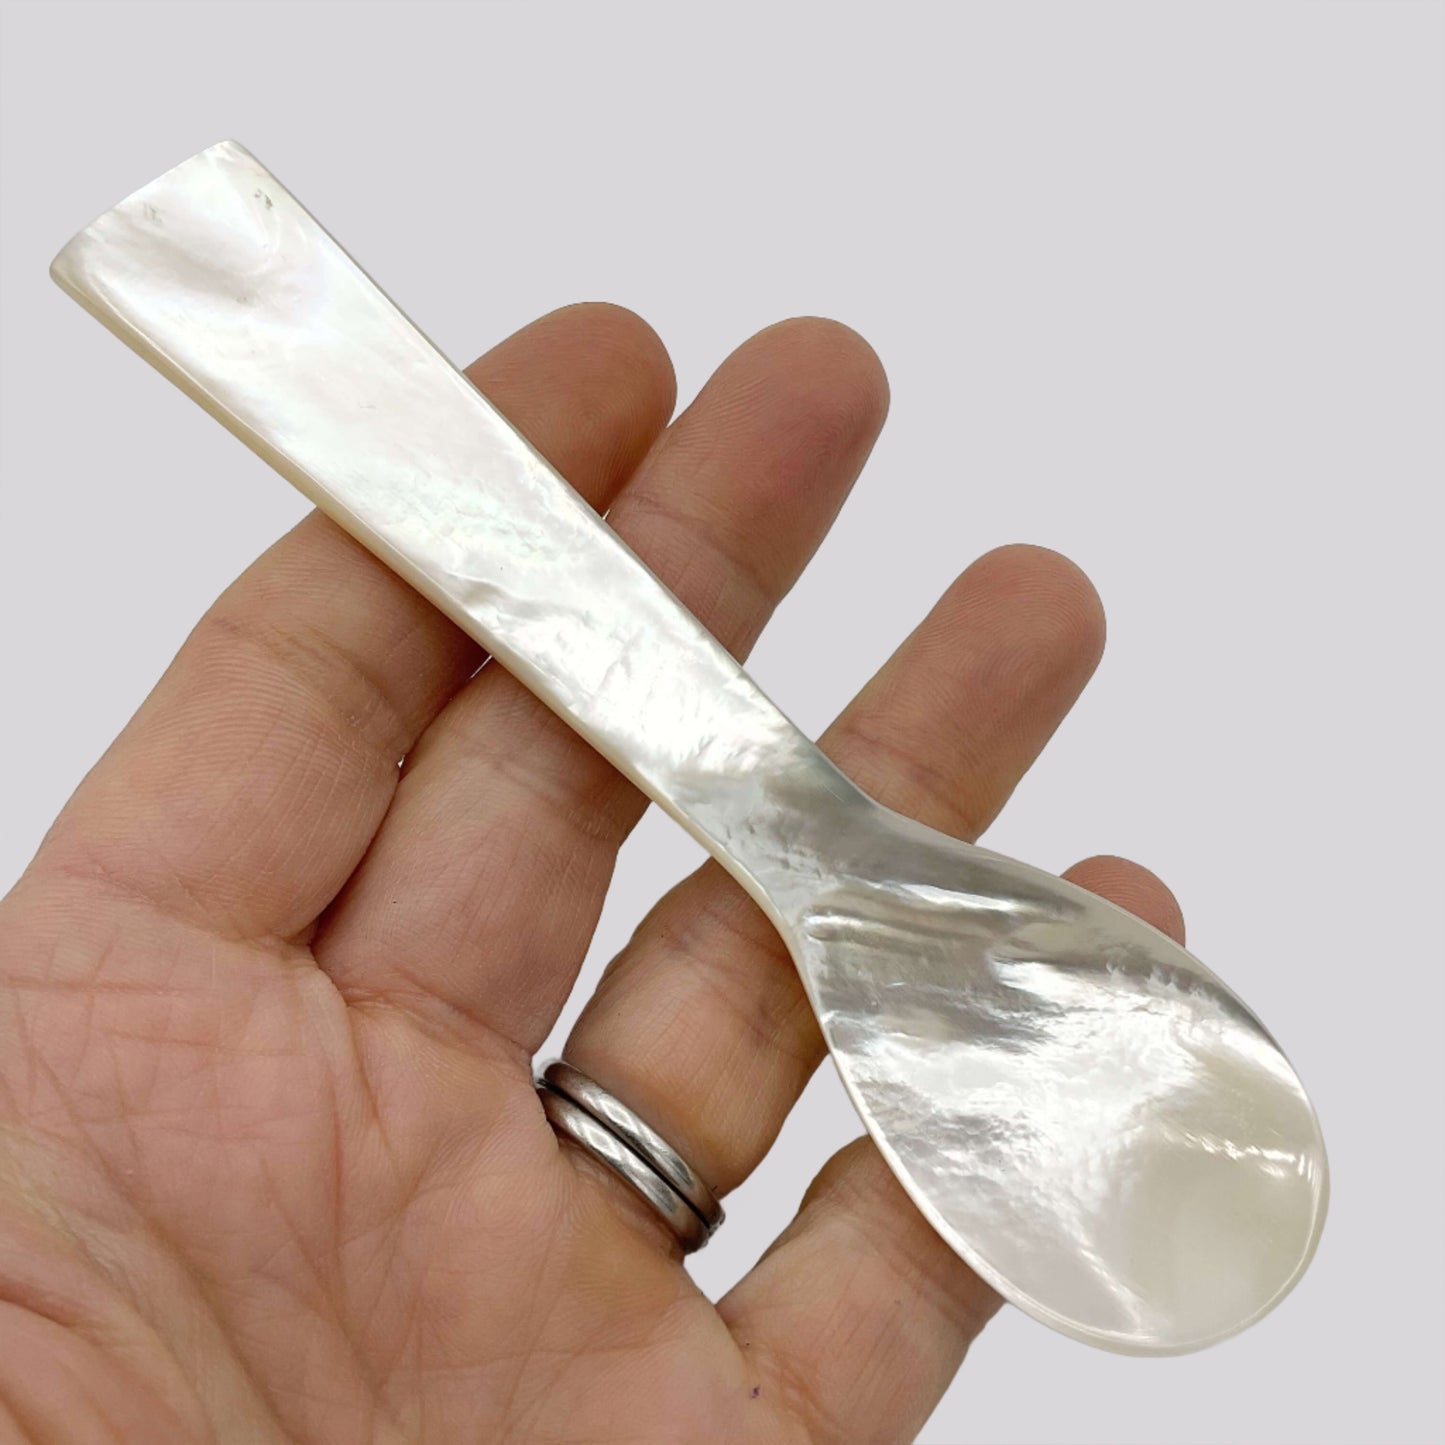 Mother of Pearl spoon held in a hand